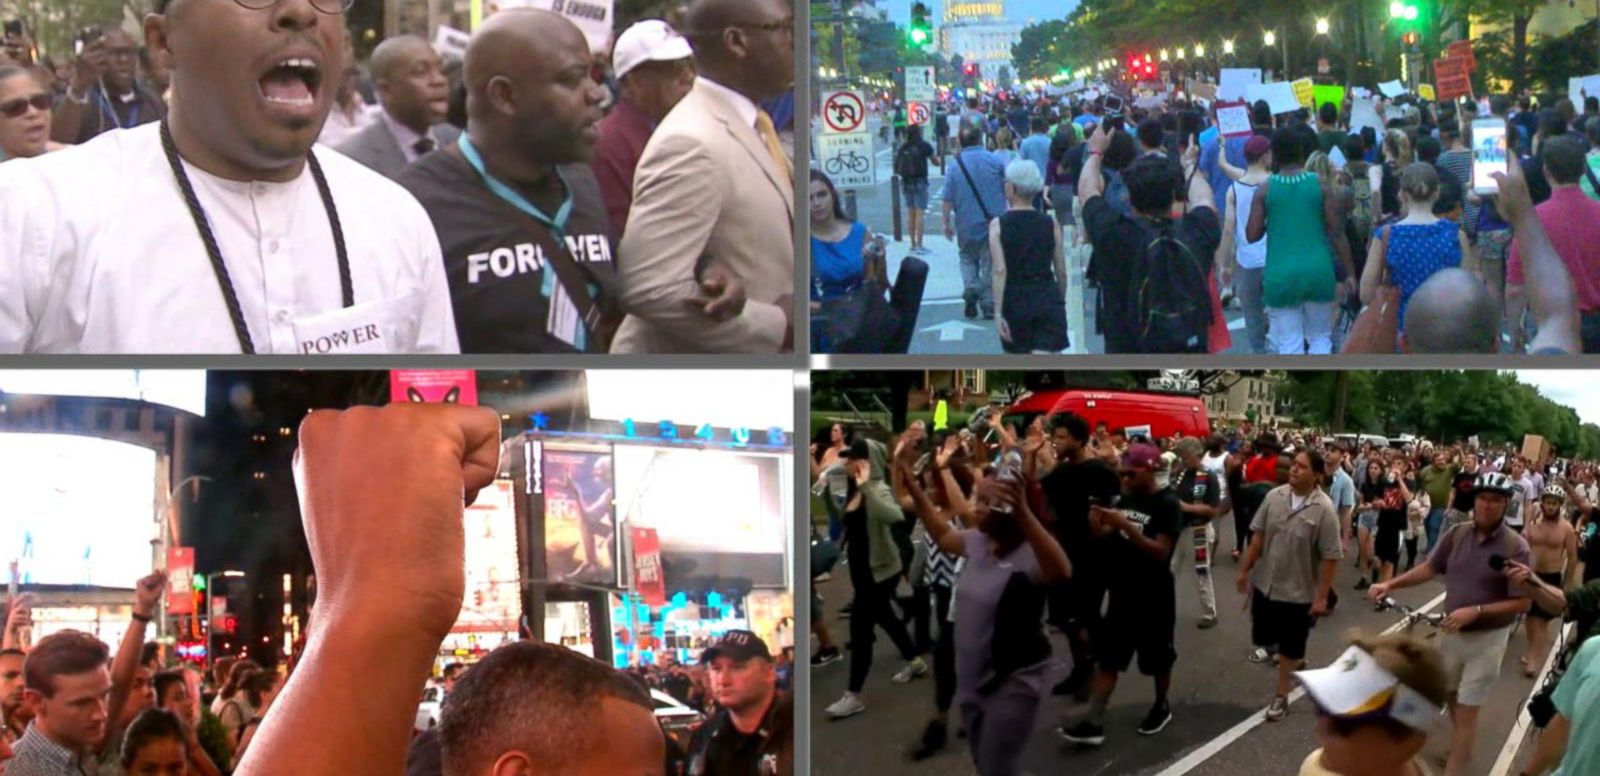 VIDEO: Protests Erupt in Wake of Police Shootings